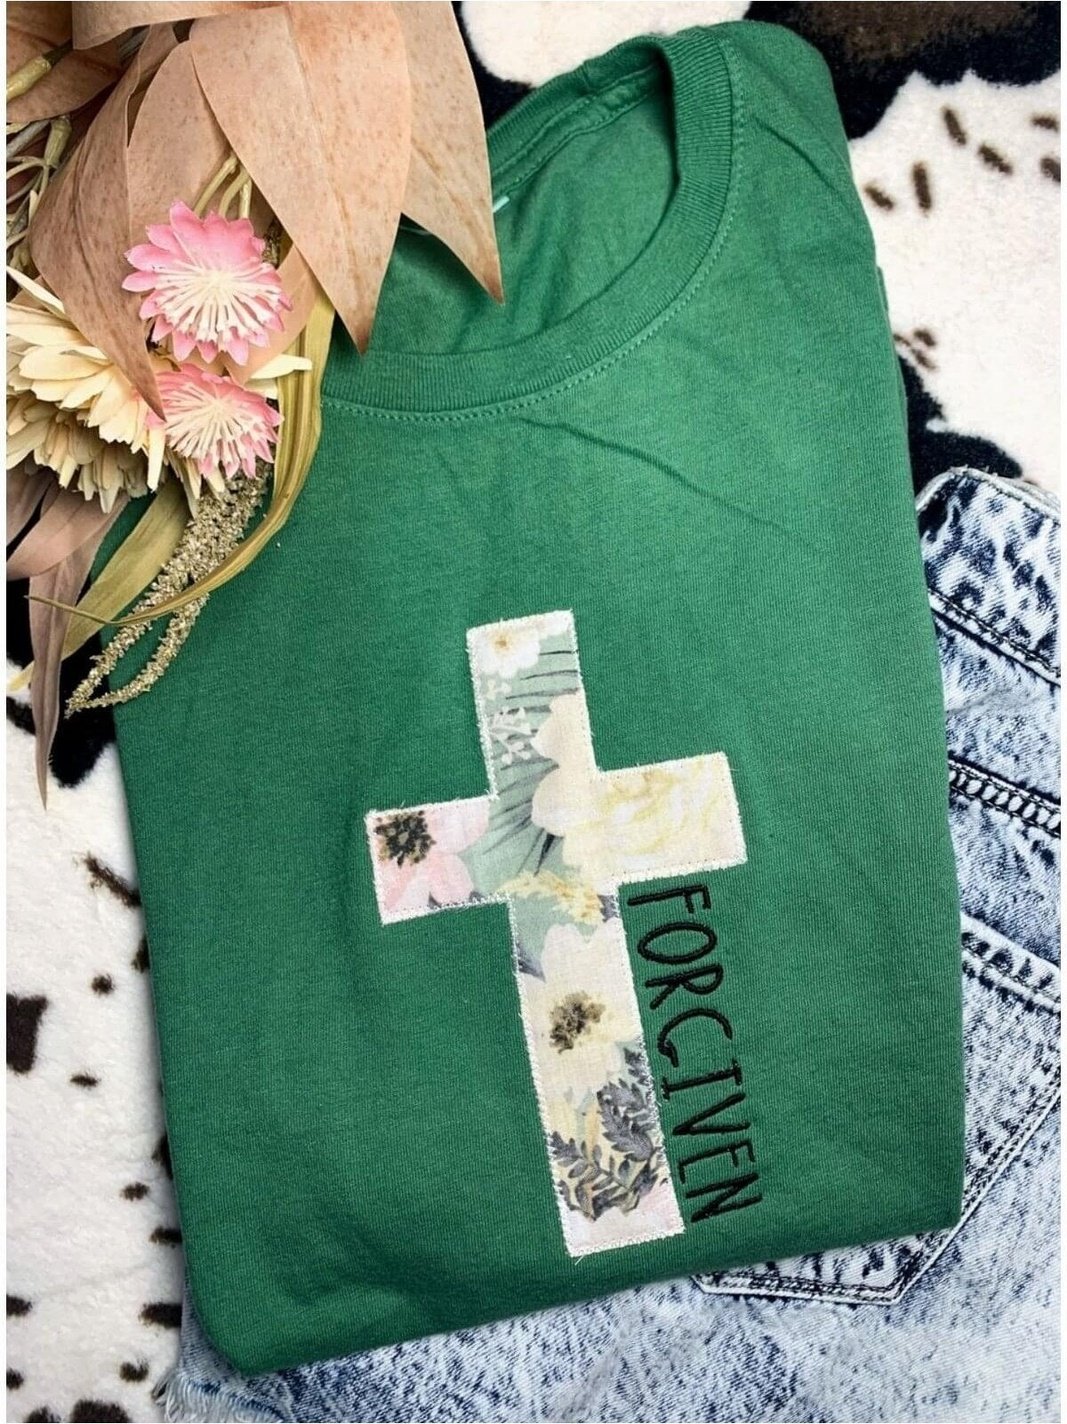 Forgiven T-Shirt with Embroidered Fabric Cross - Lolo Viv Boutique